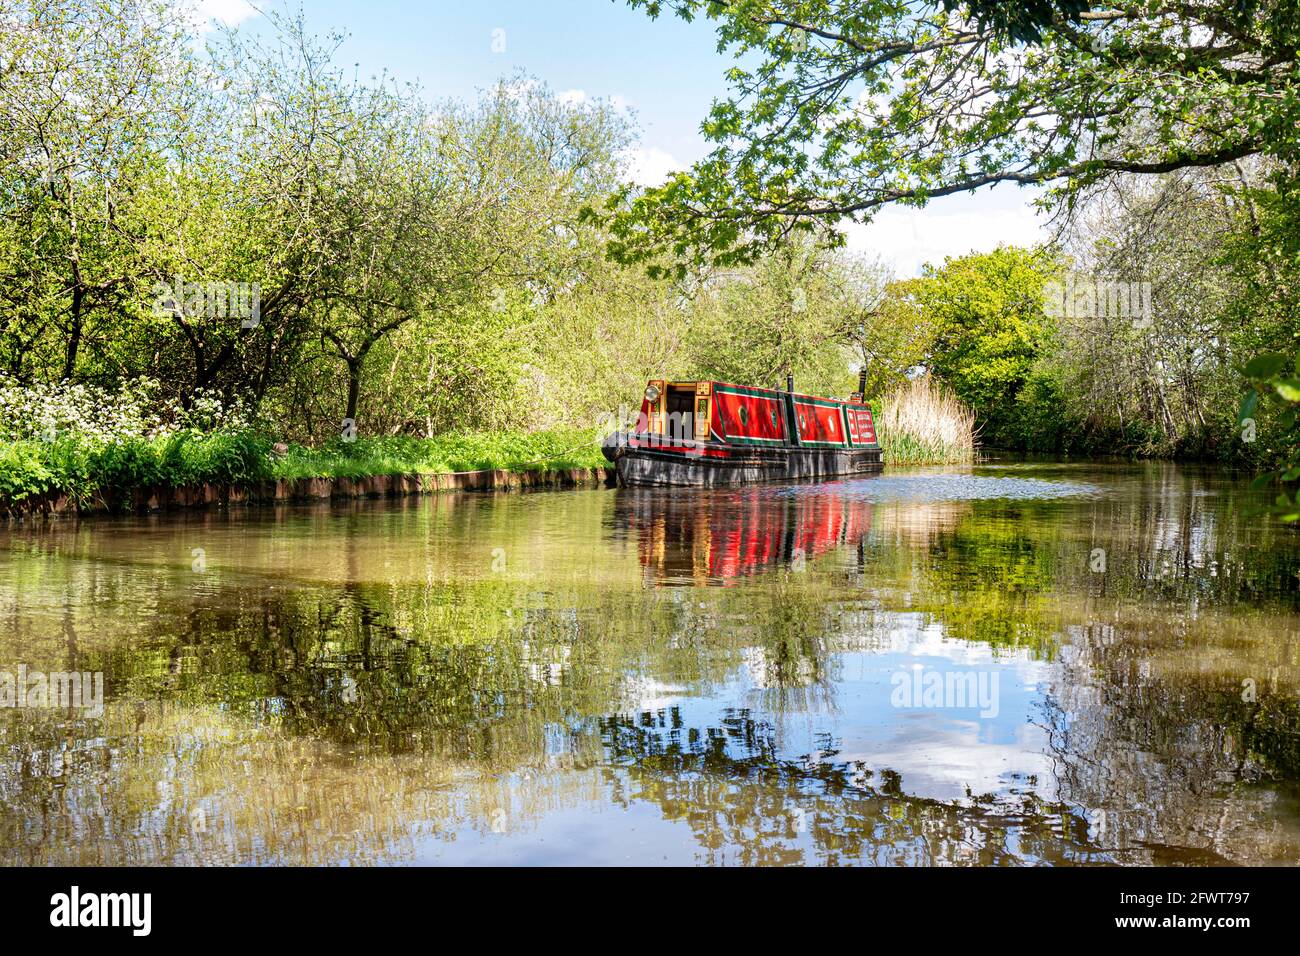 RIVER WEY Traditional Narrow Boat on The River Wey downstream from High Bridge, moored up for a staycation lunch on a still sunny spring summer day Stock Photo